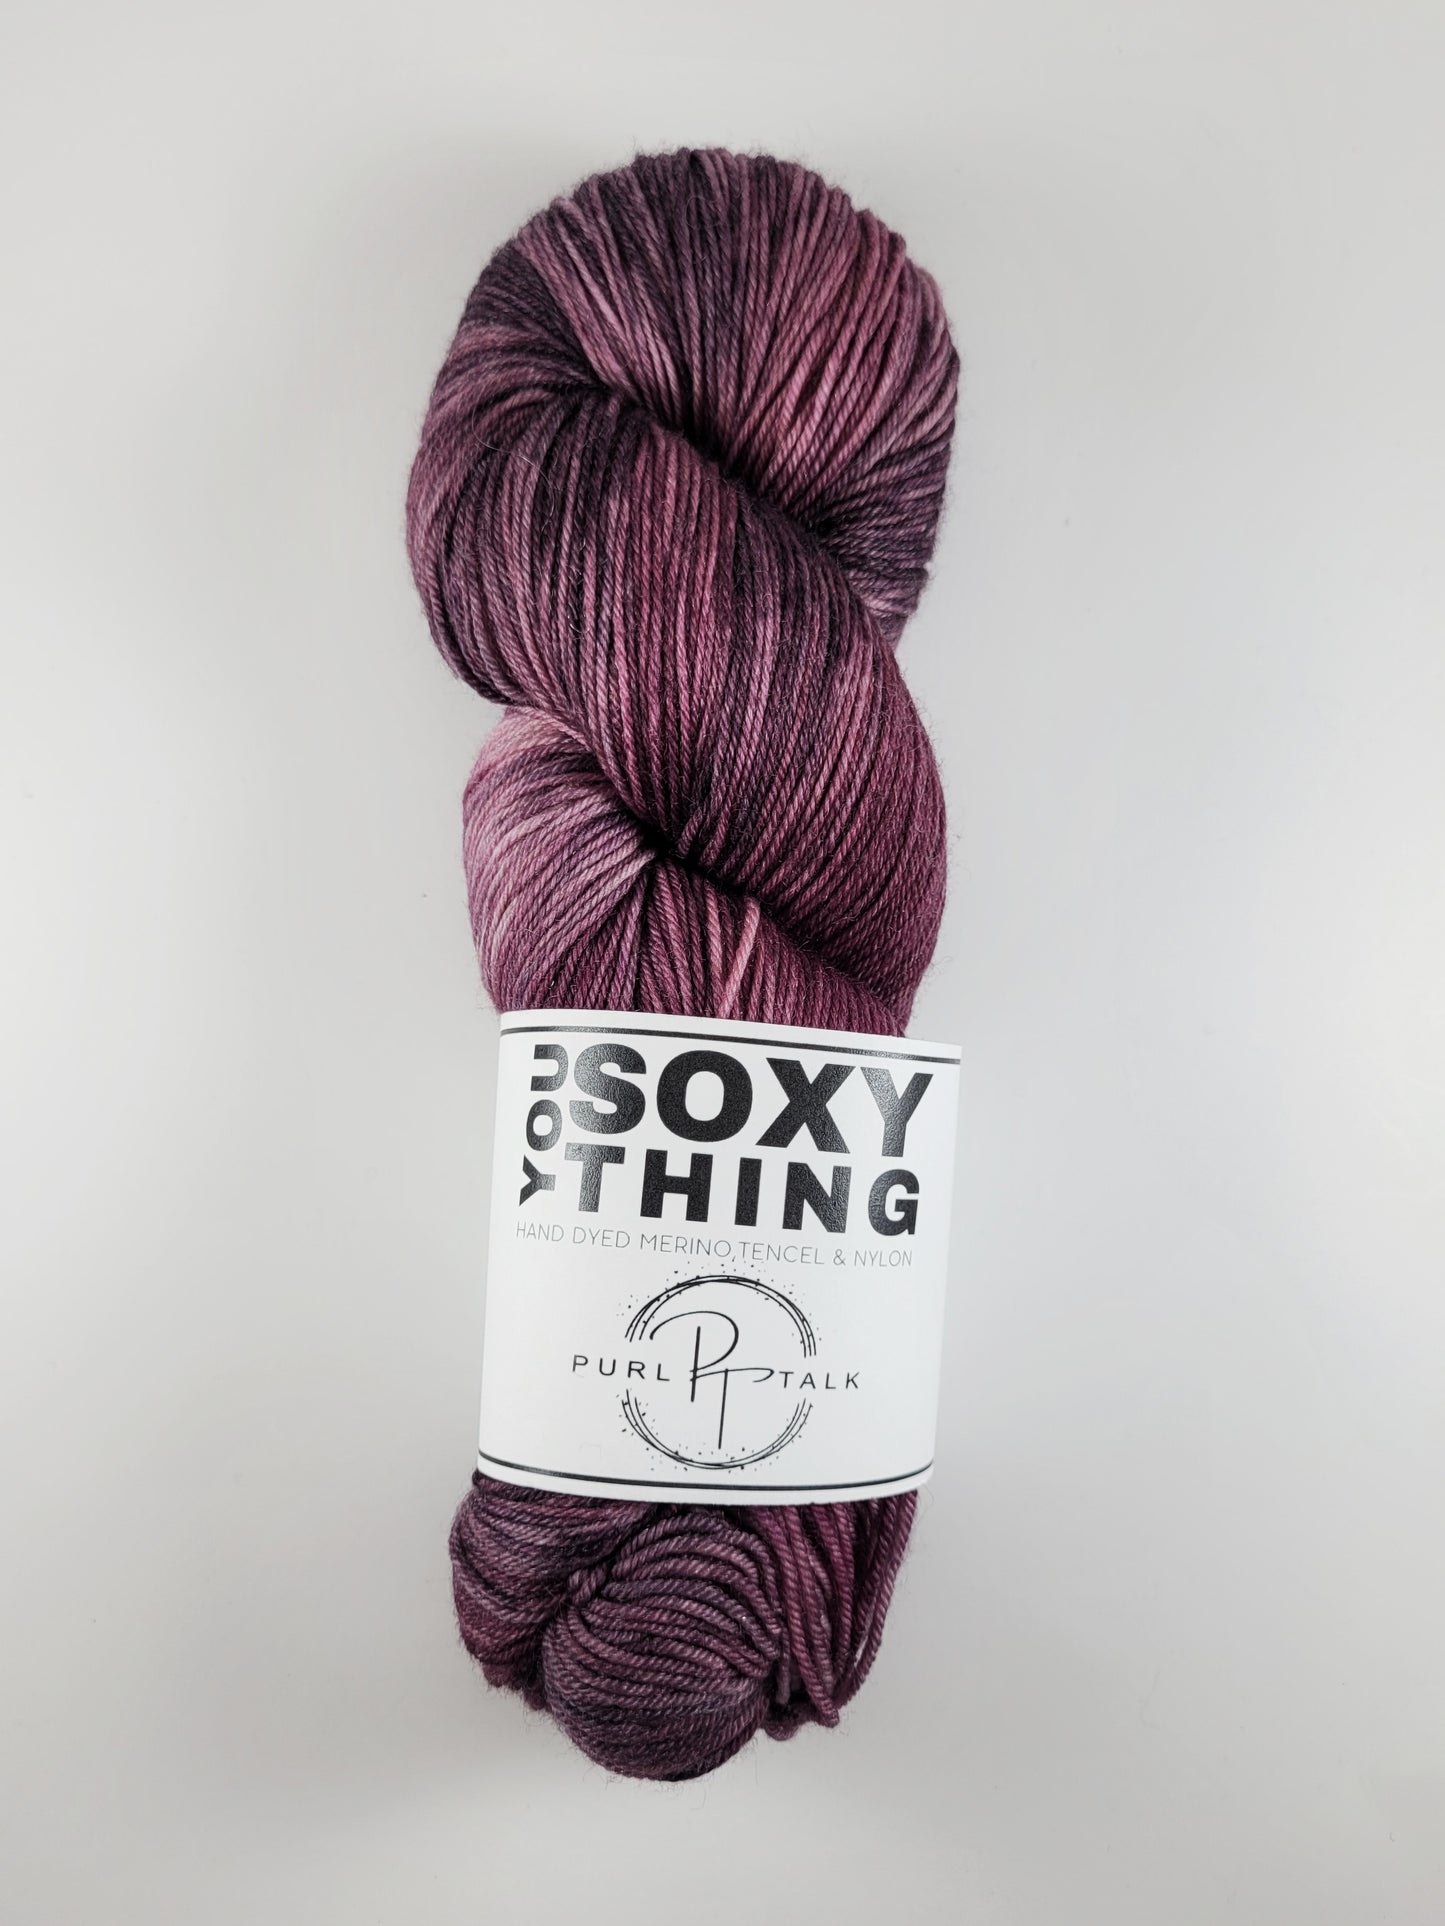 You Soxy Thing:  Stormy Rose, tonal